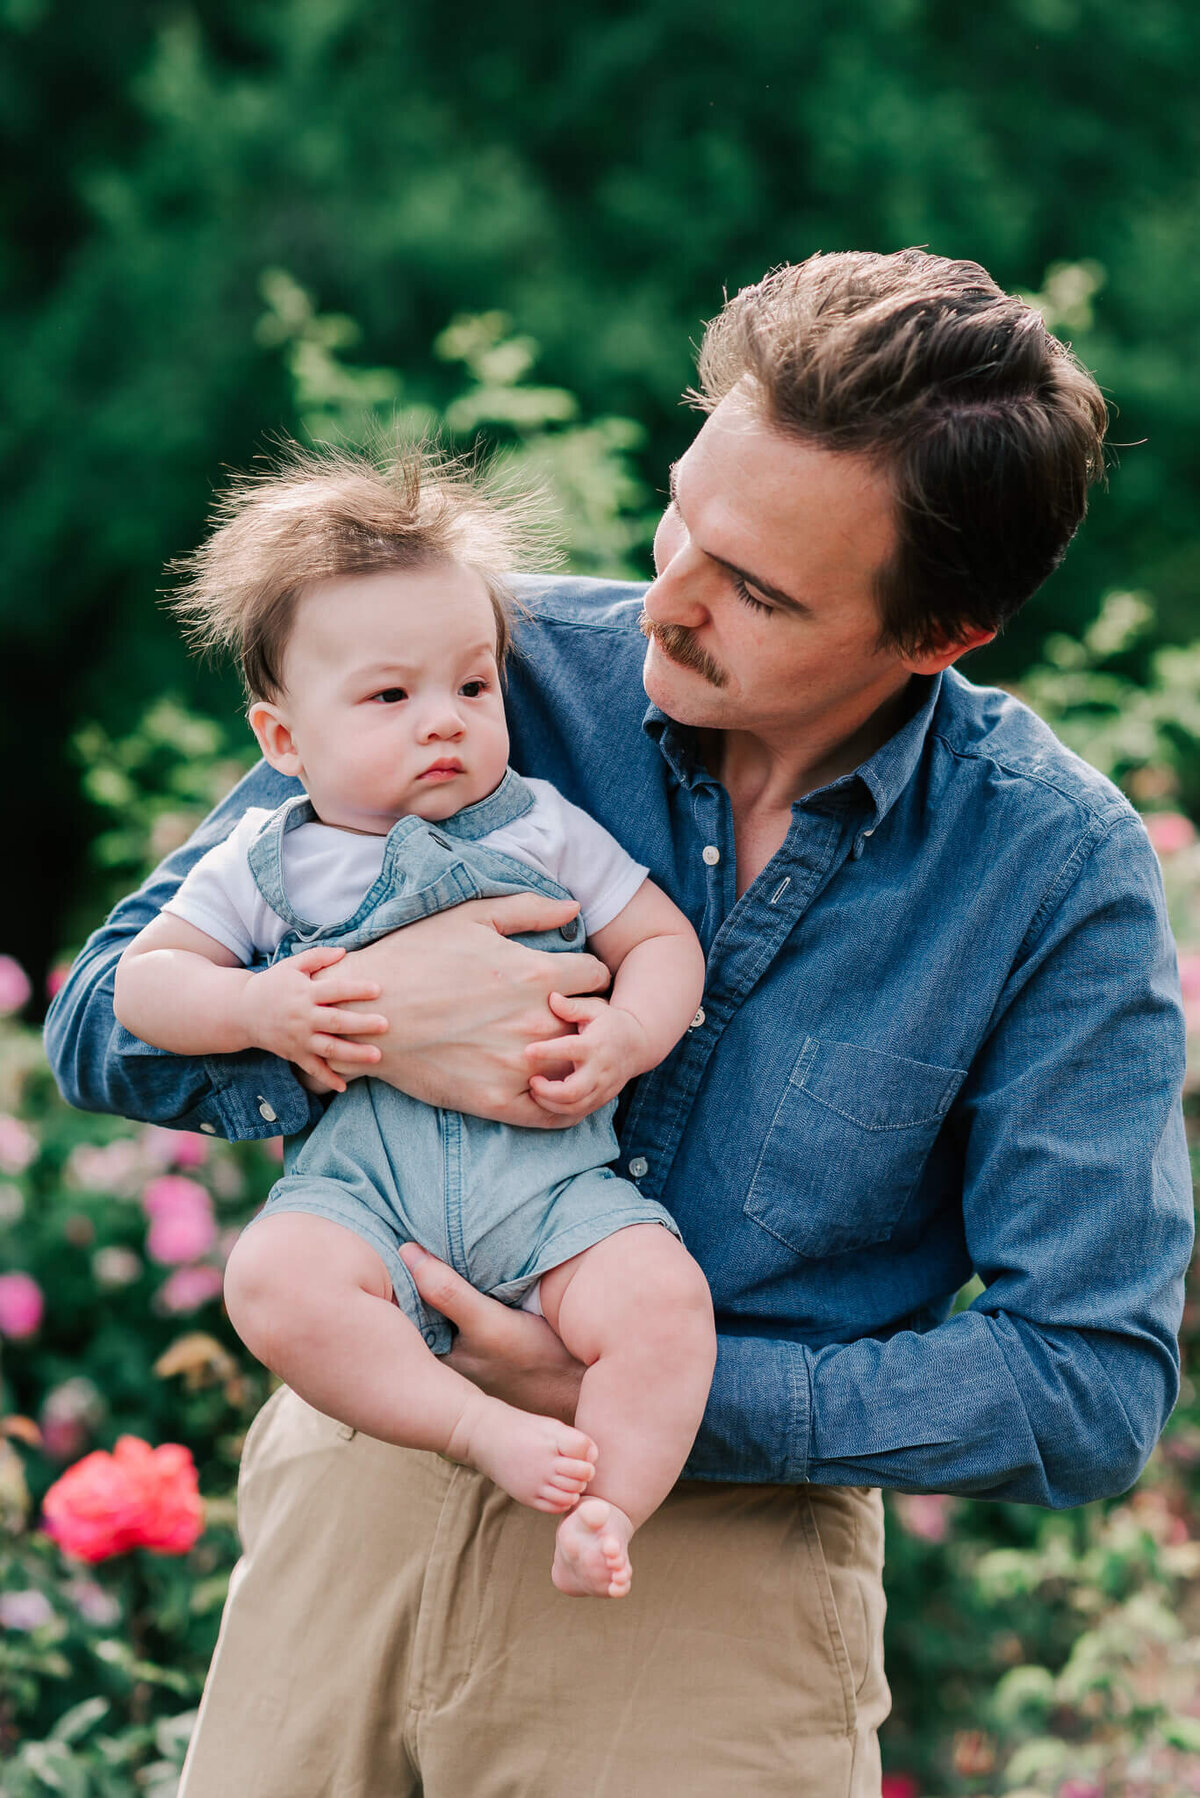 A father holding his son, taken by a northern virginia family photographer